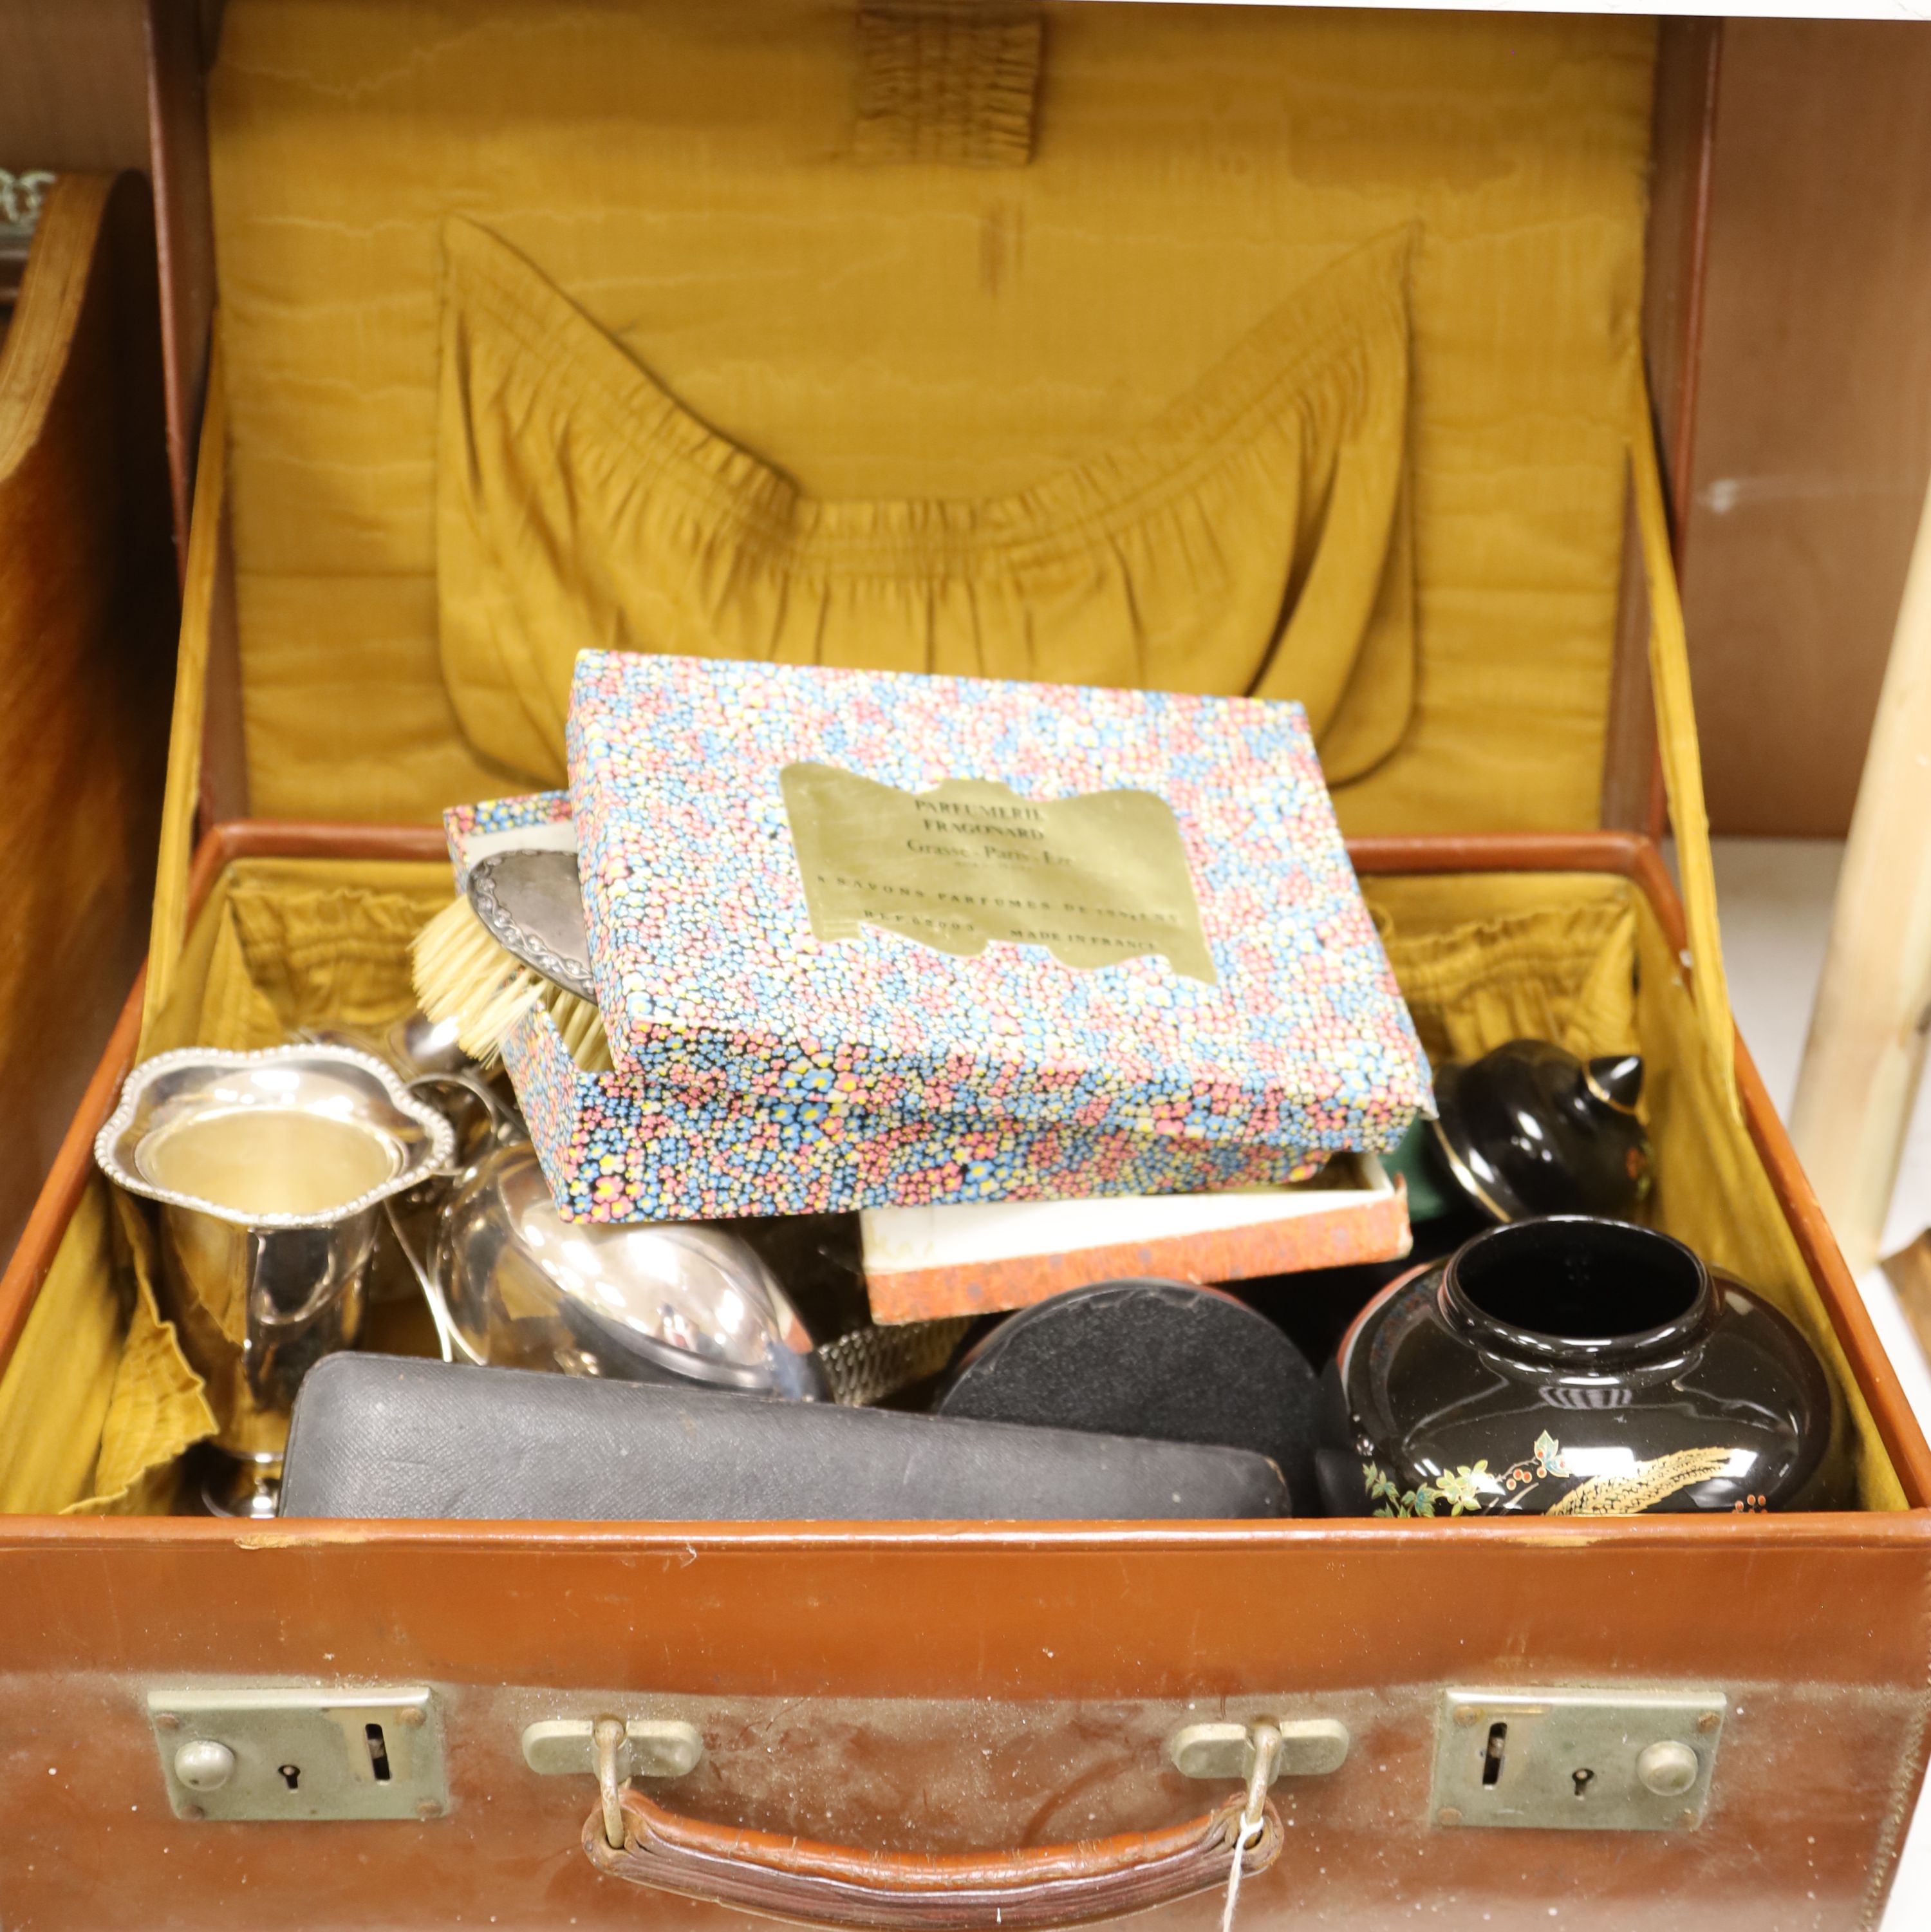 A leather case with collectables including a silver cigarette case, plated wares, a vase etc.